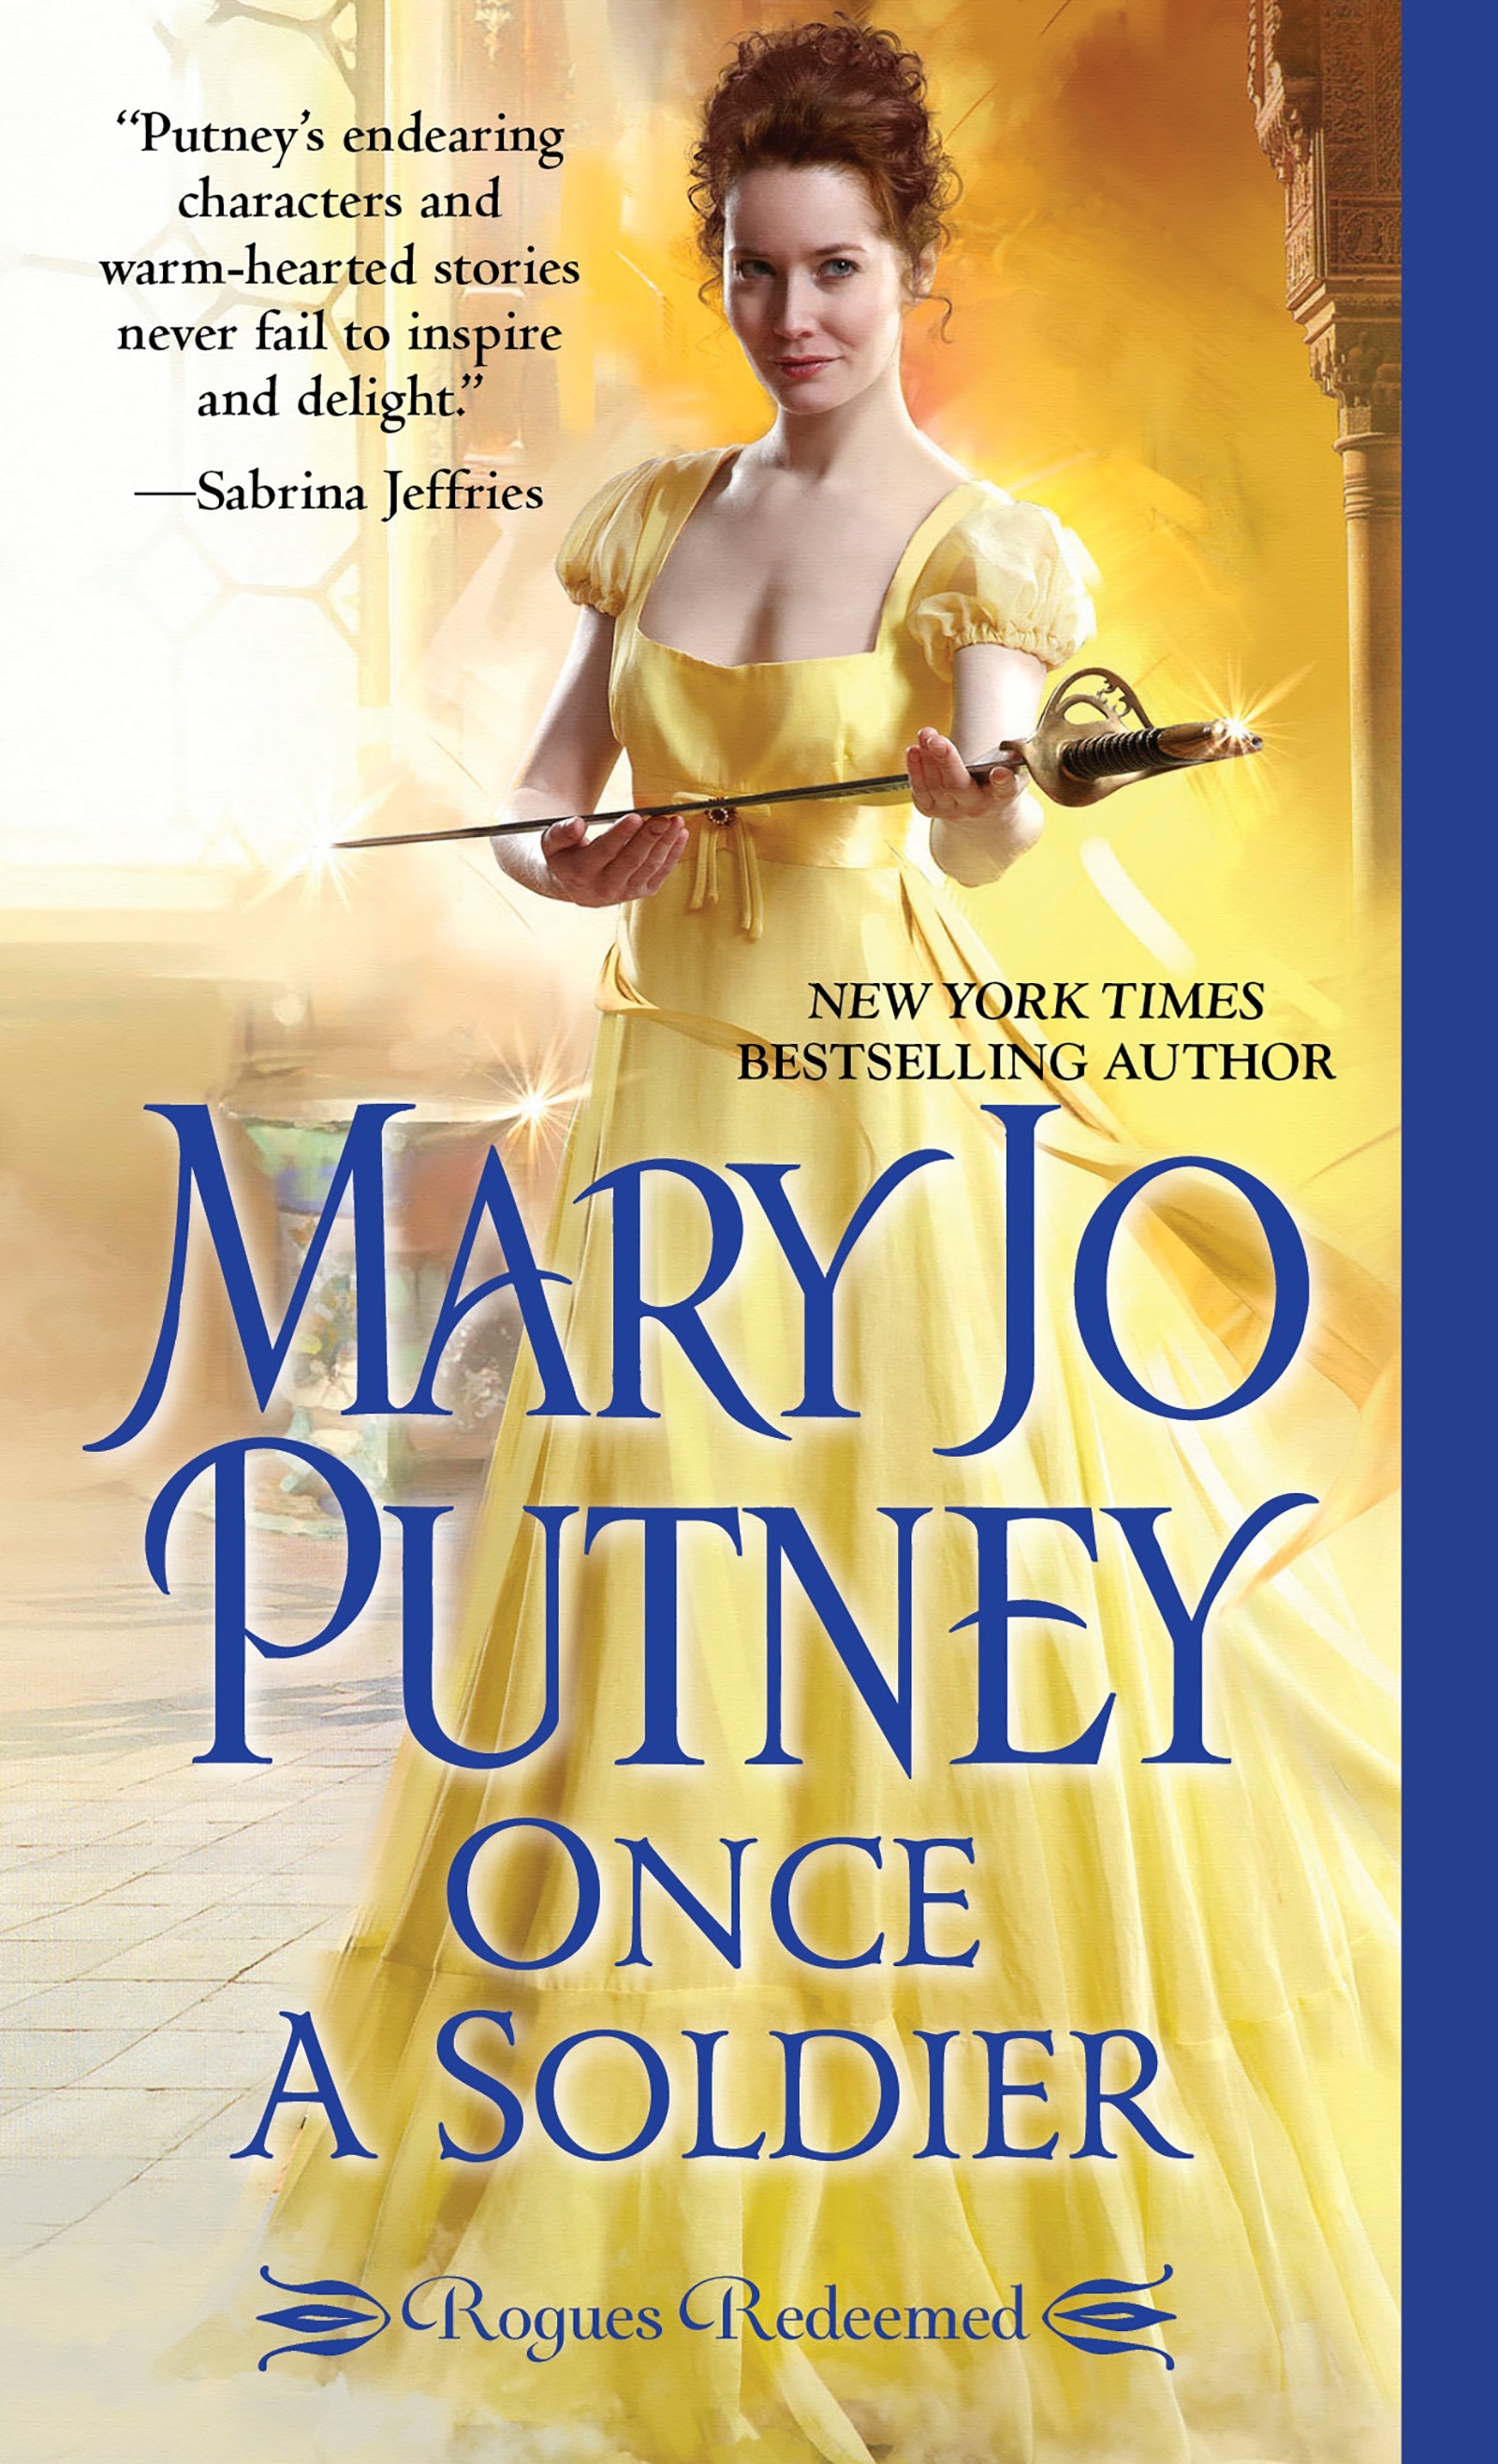 Once A Soldier by Mary Jo Putney - Penguin Books Australia